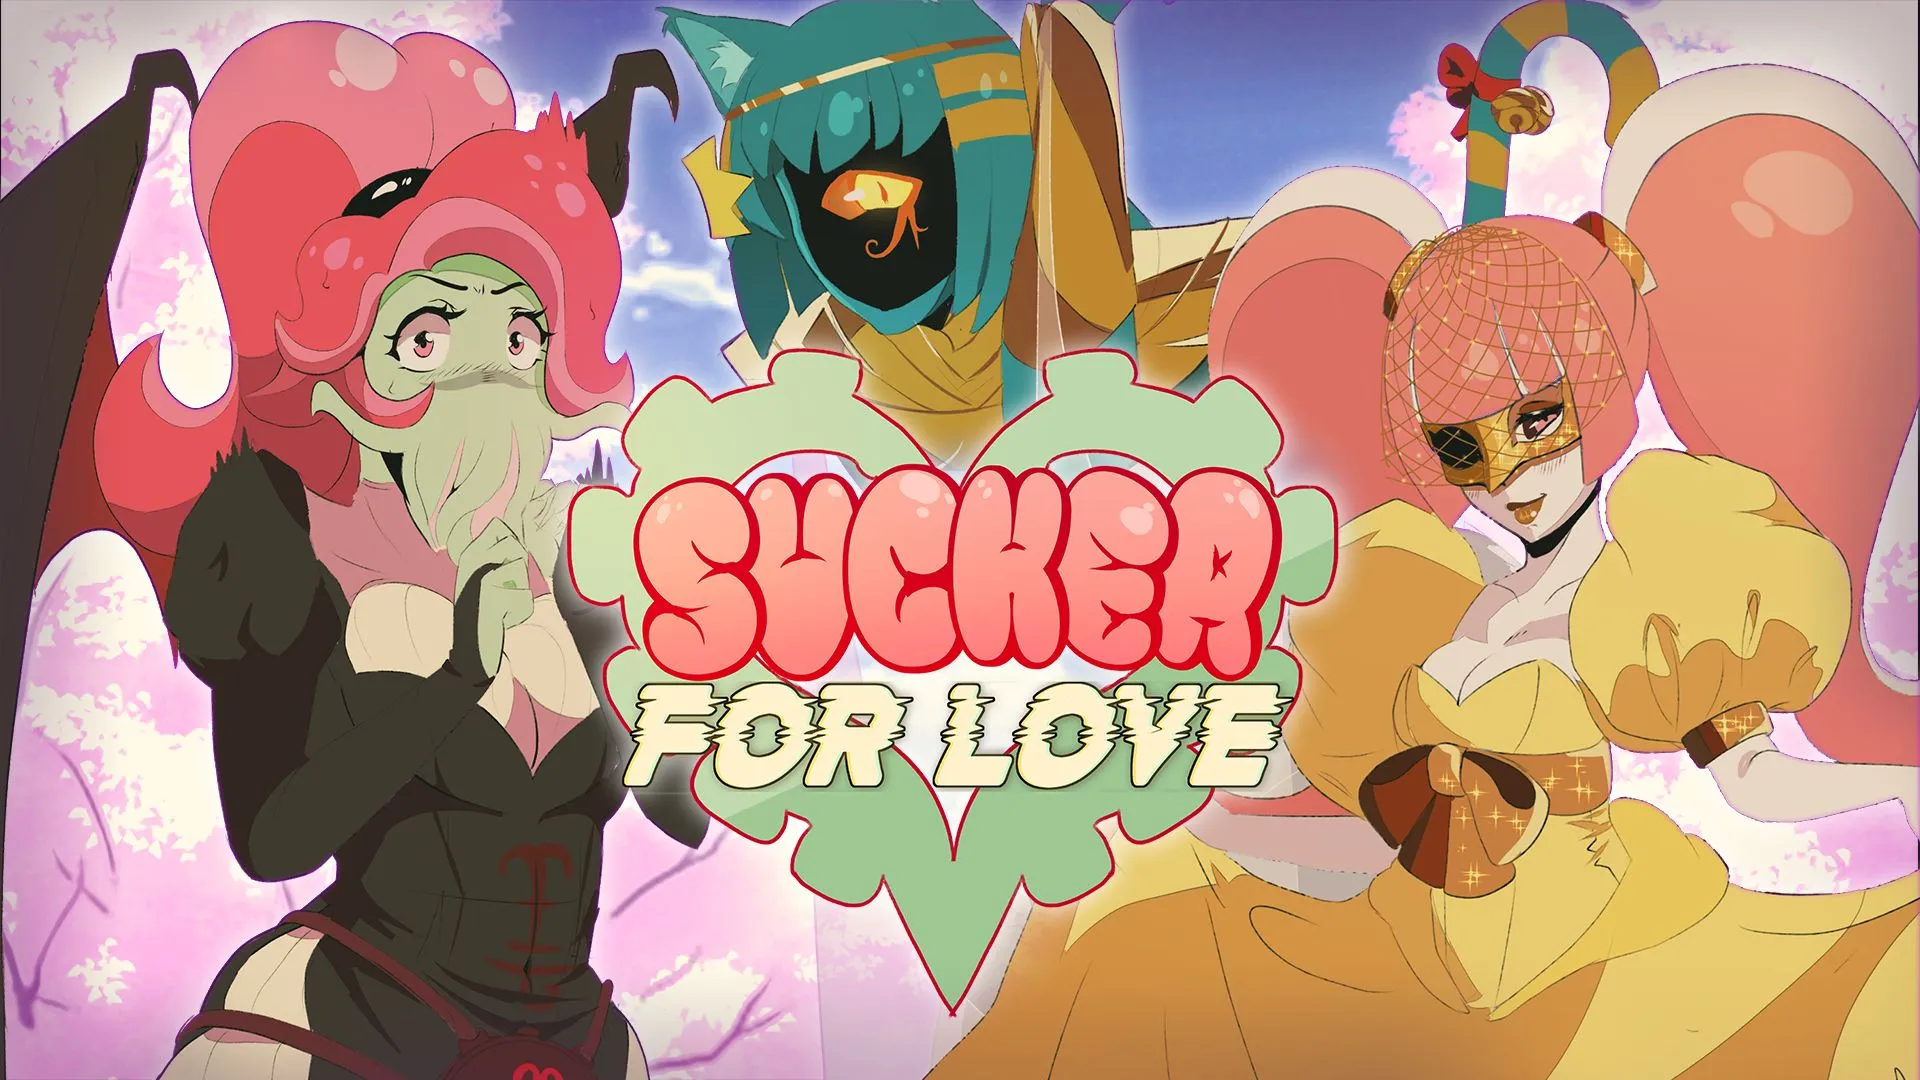 Sucker for Love: First Date main image